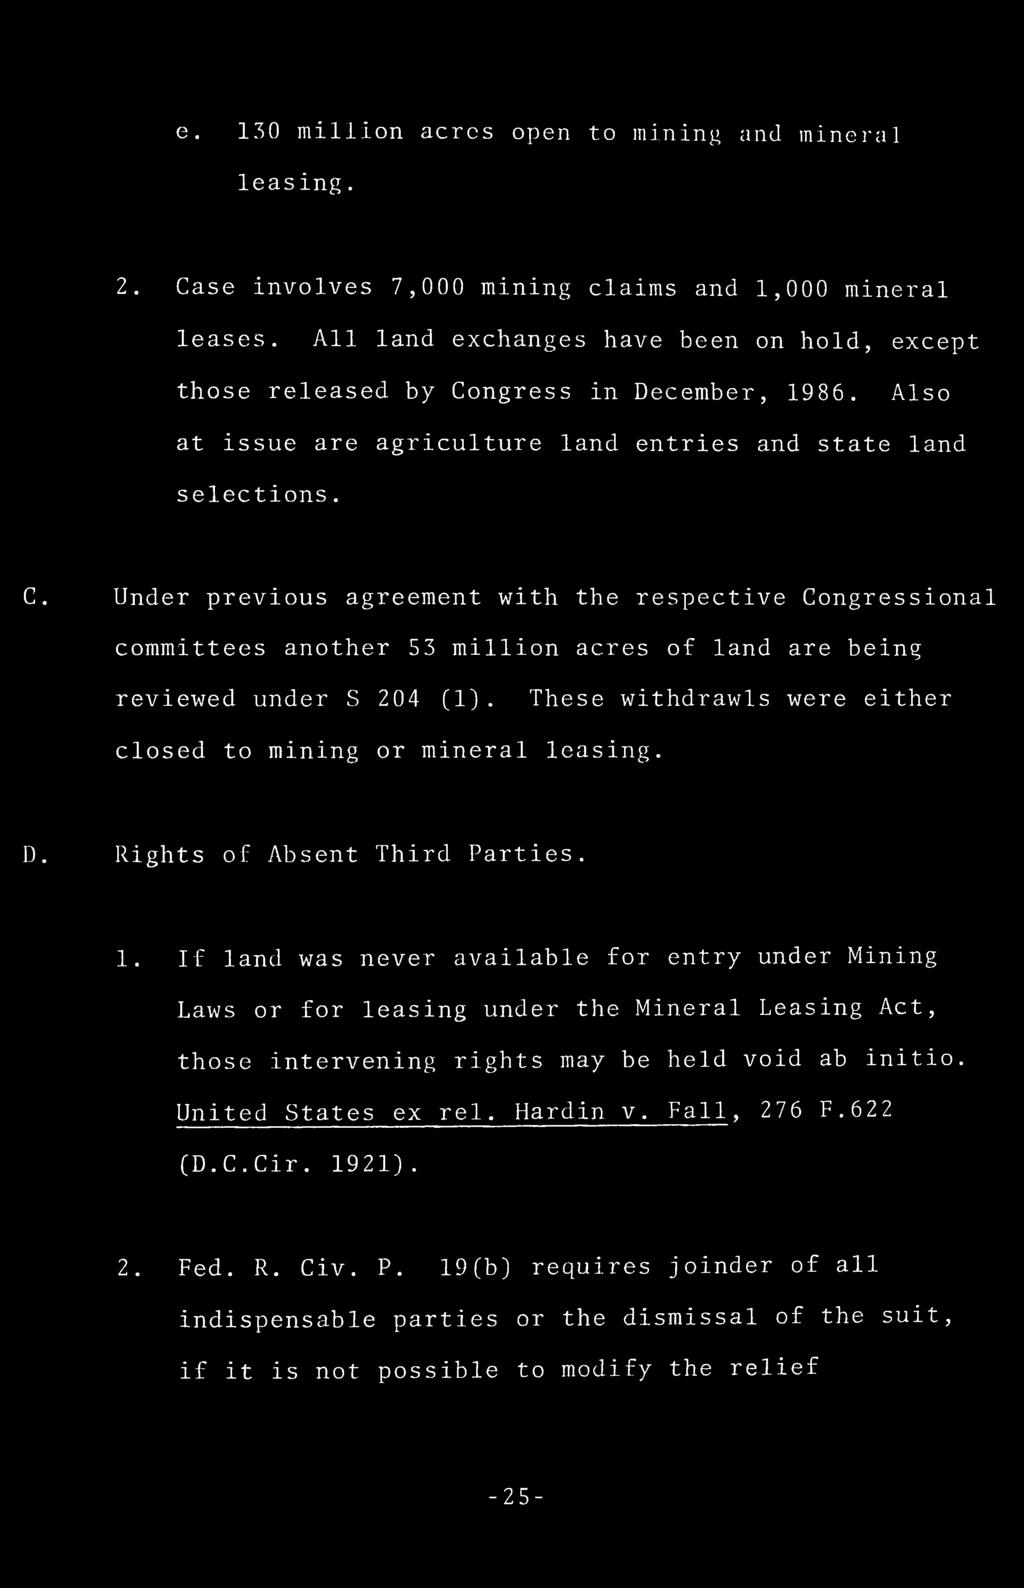 ngress in December, 1986. Also at issue are agriculture land entries and state land selections. C.